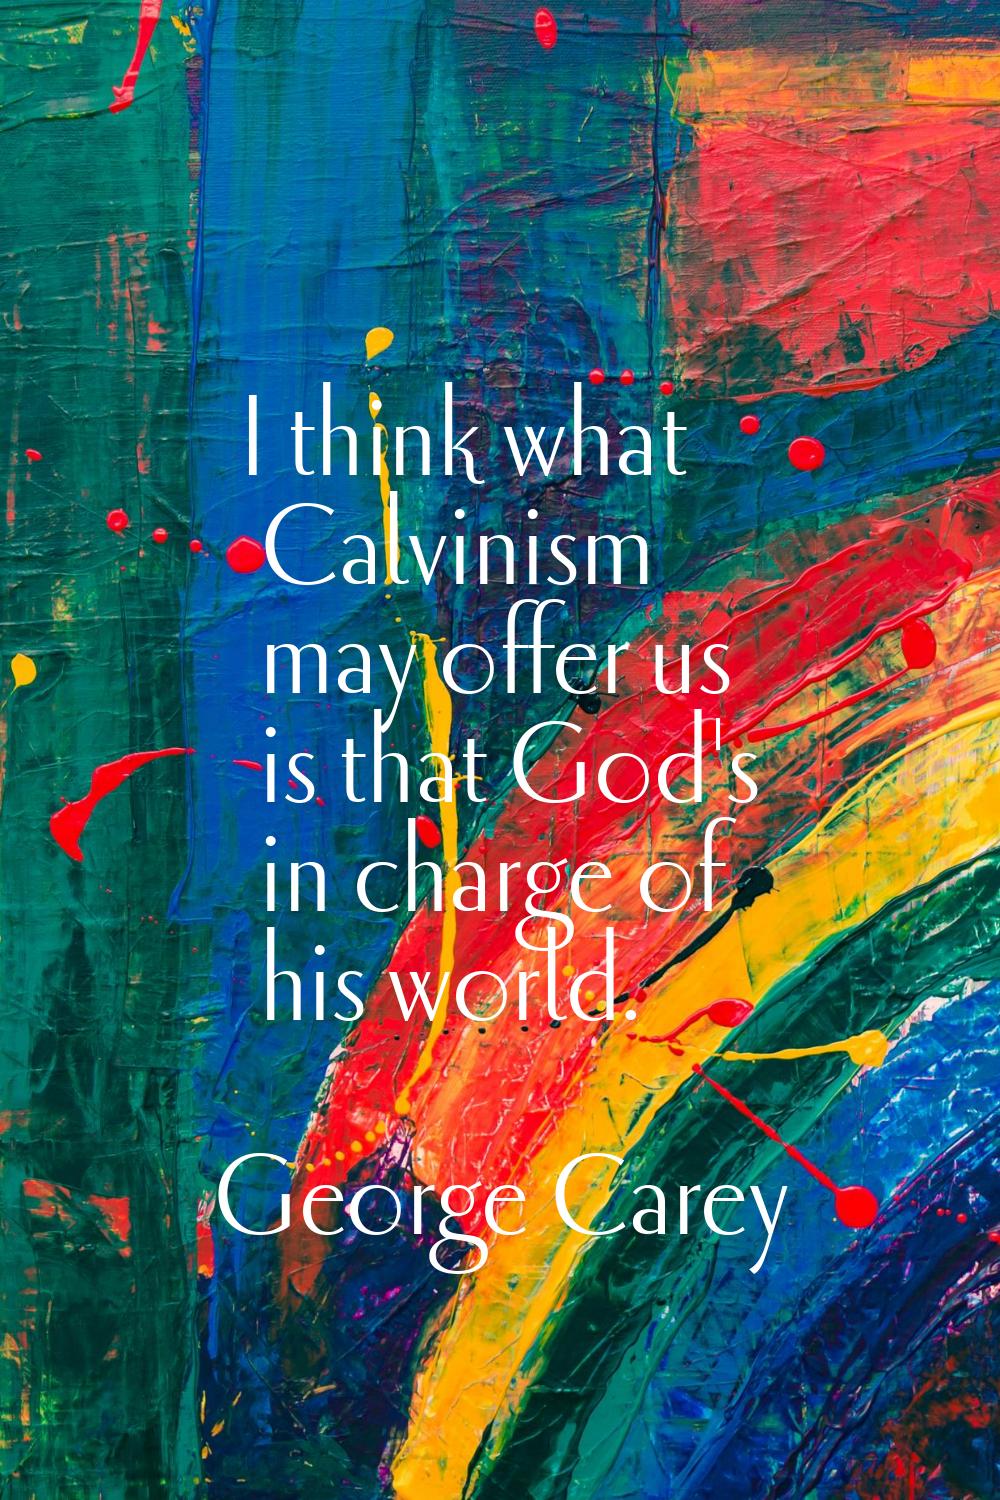 I think what Calvinism may offer us is that God's in charge of his world.